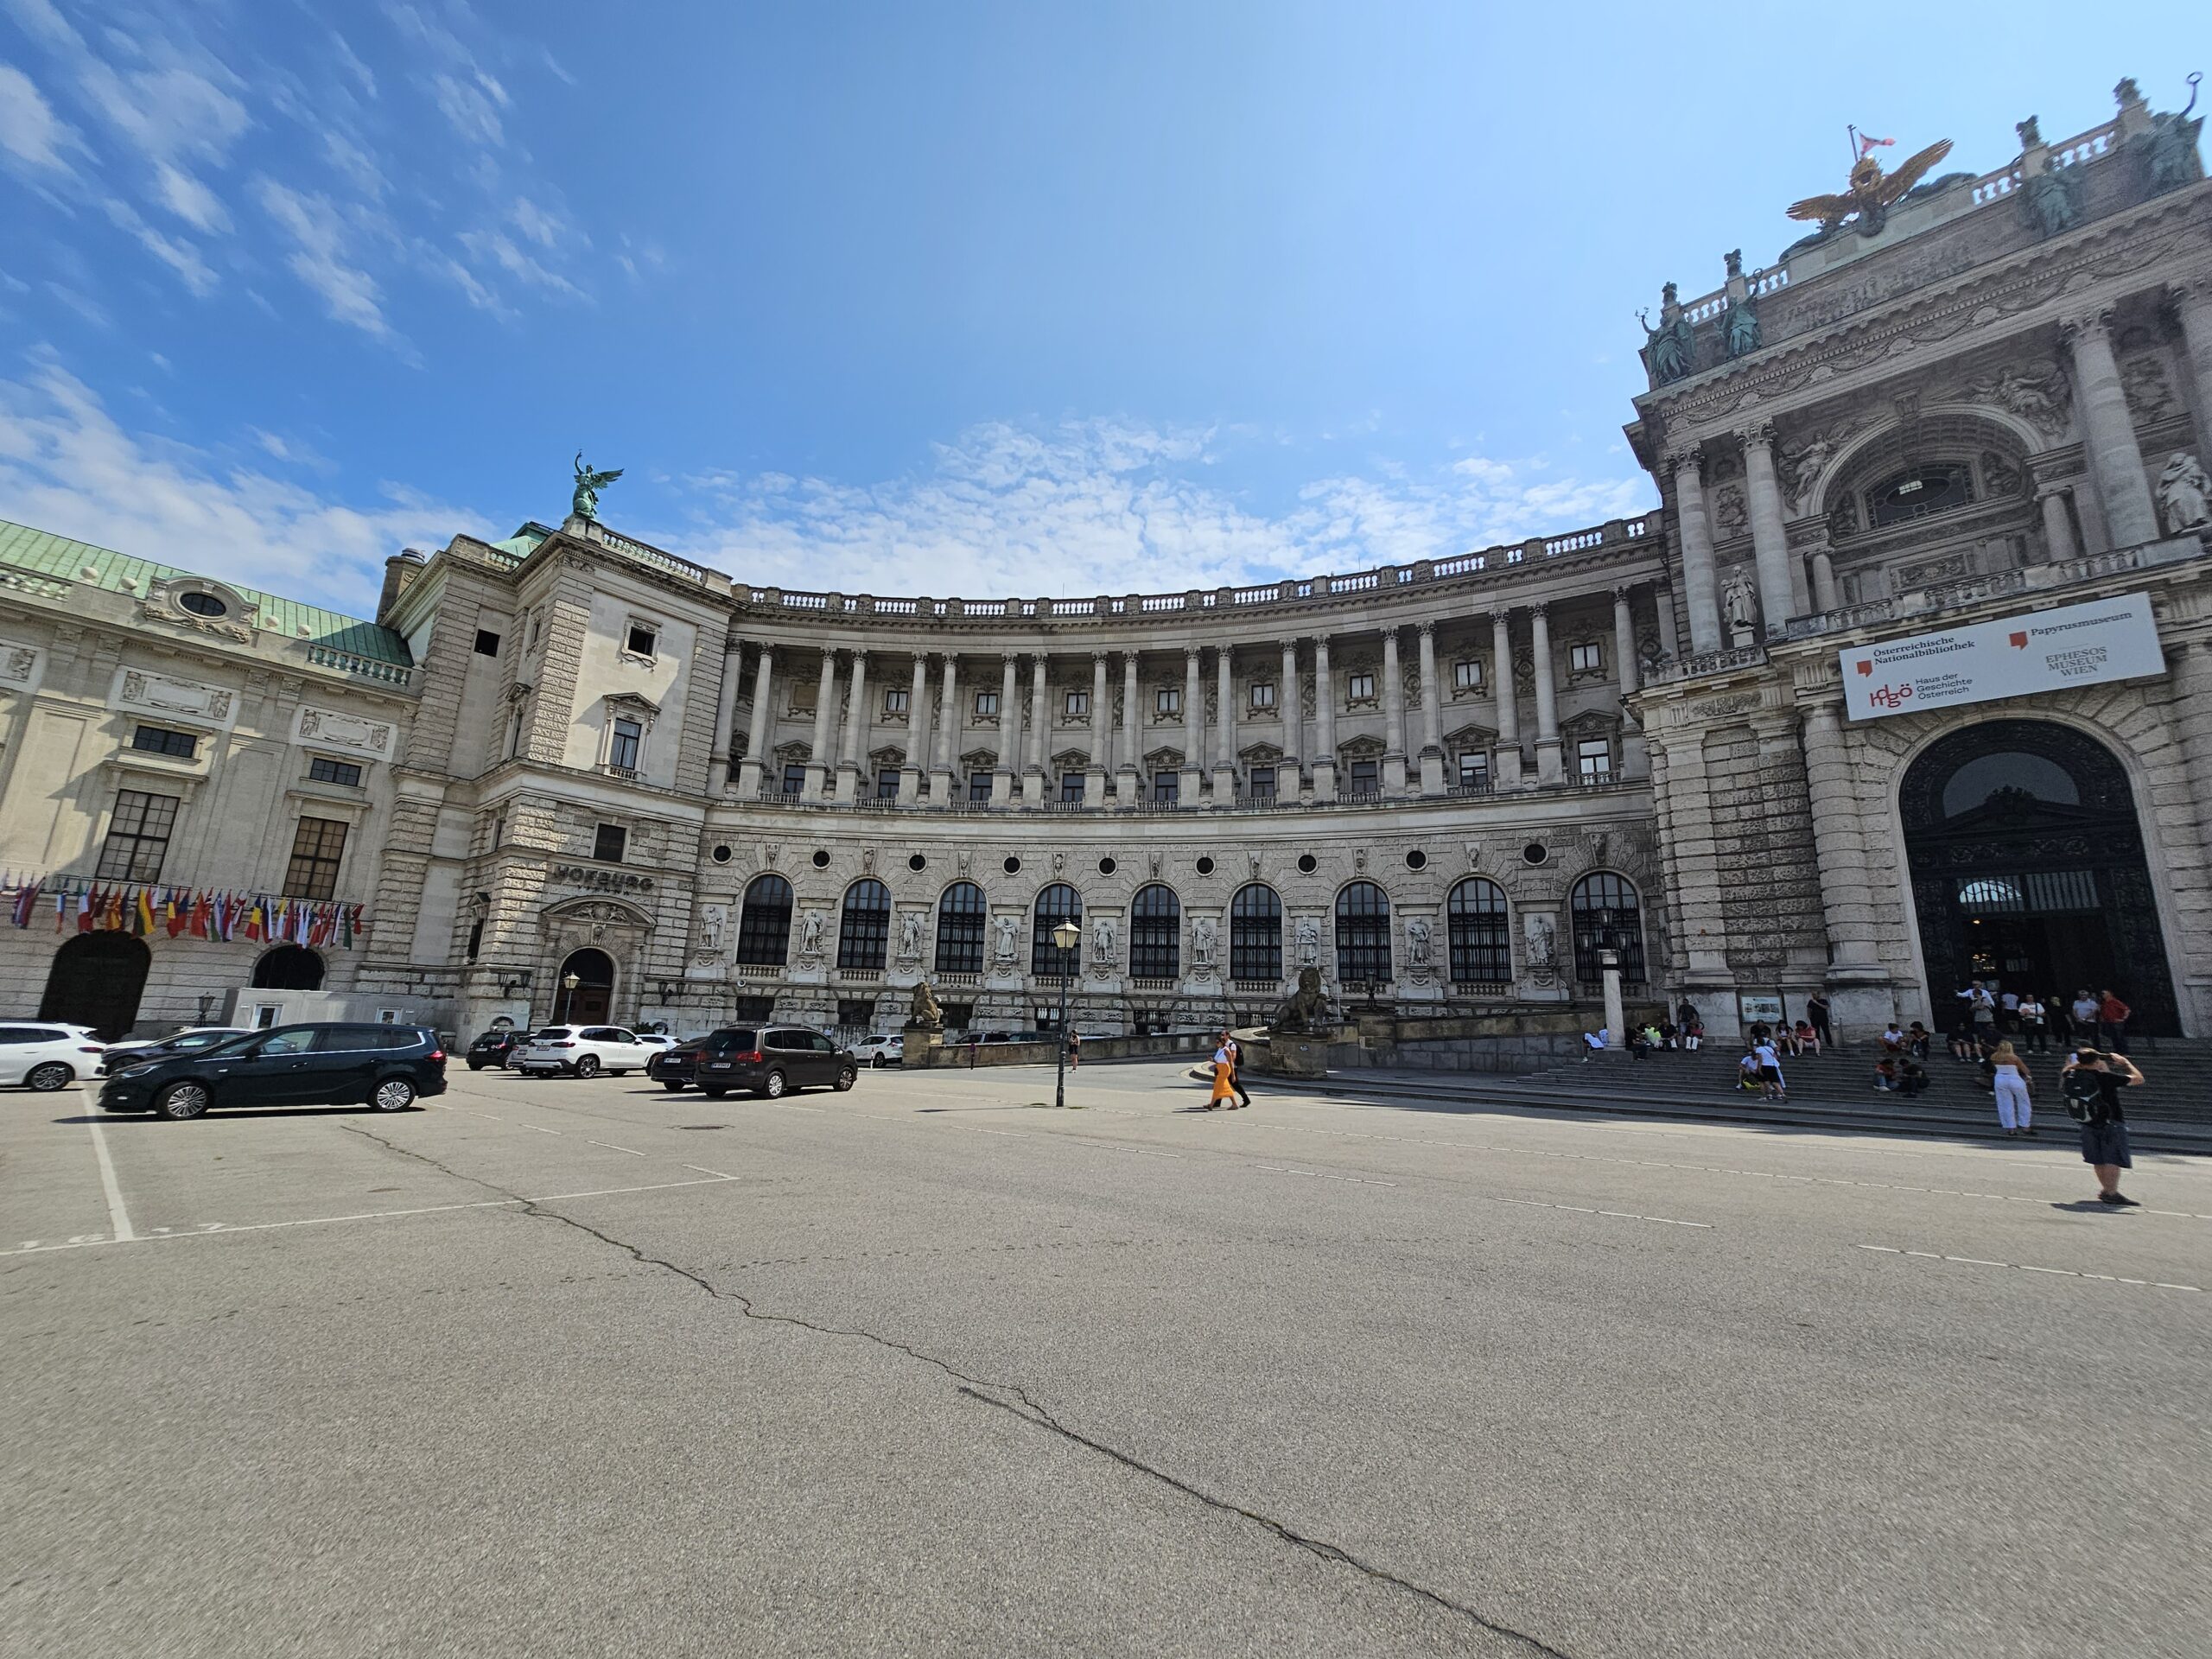 View of the Hofburg palace from the side. Image by 360onhistory.com